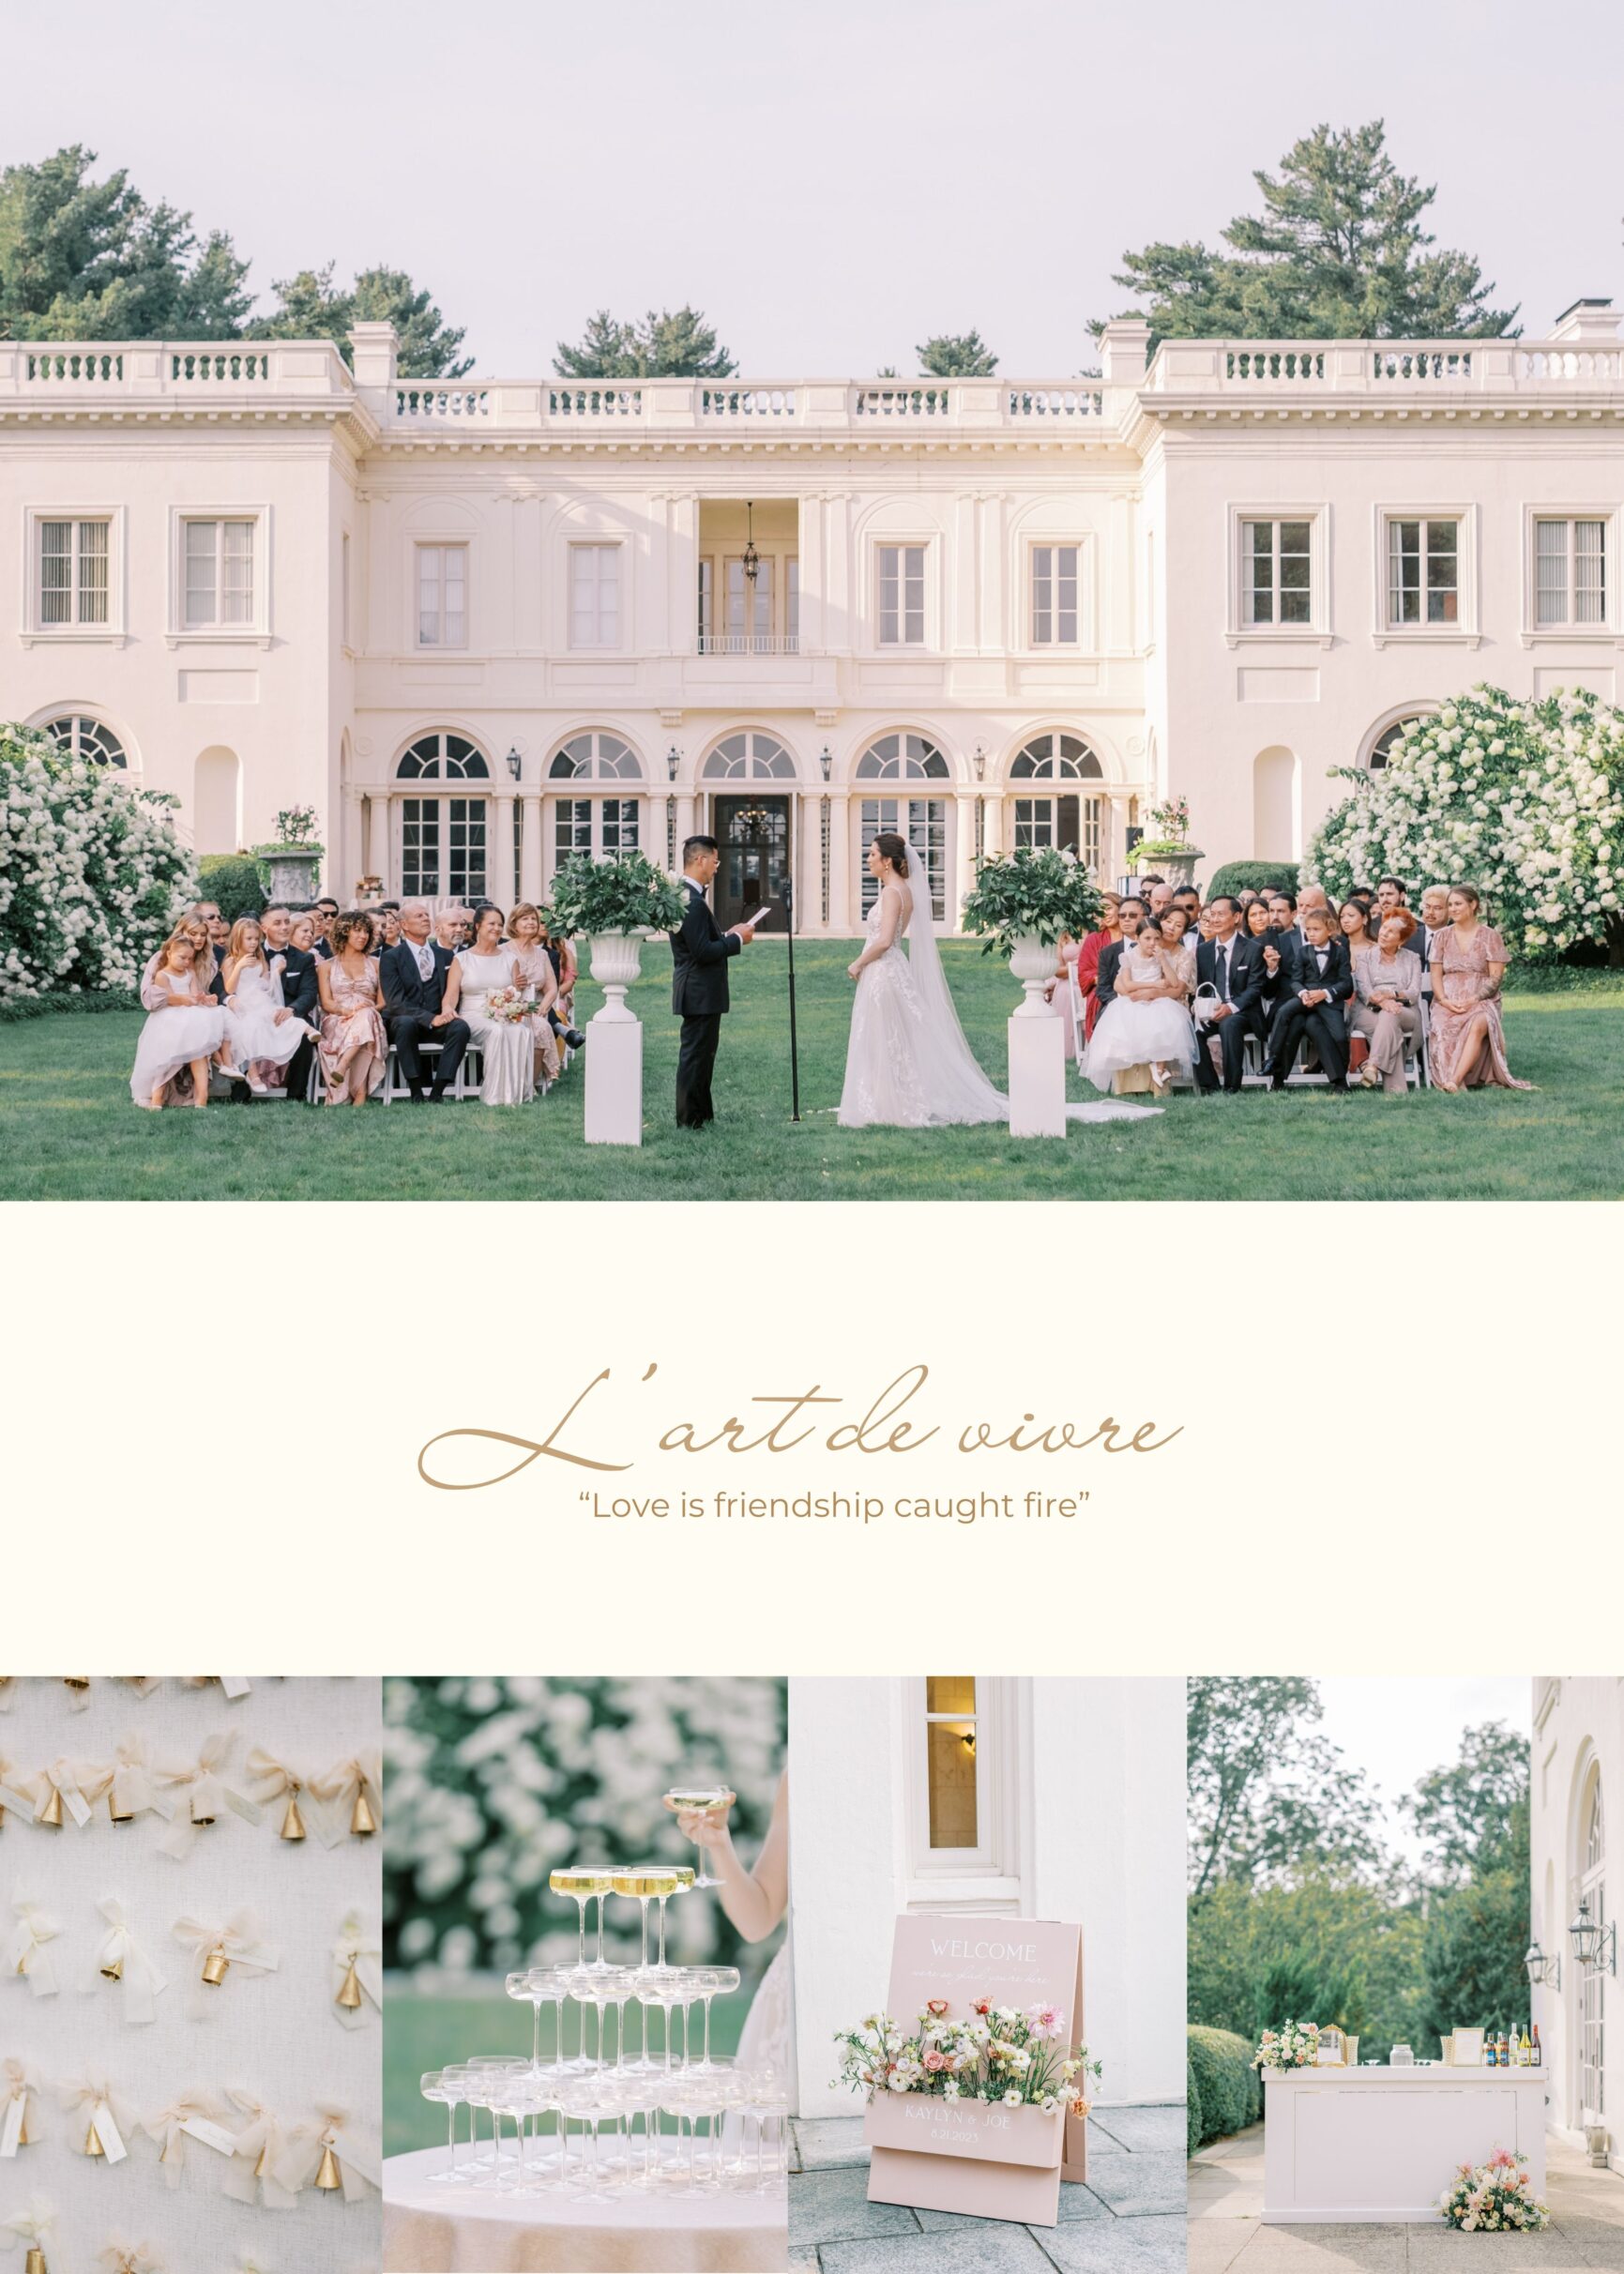 our wedding featured on the knot at wadsworth mansion wedding mood board and design